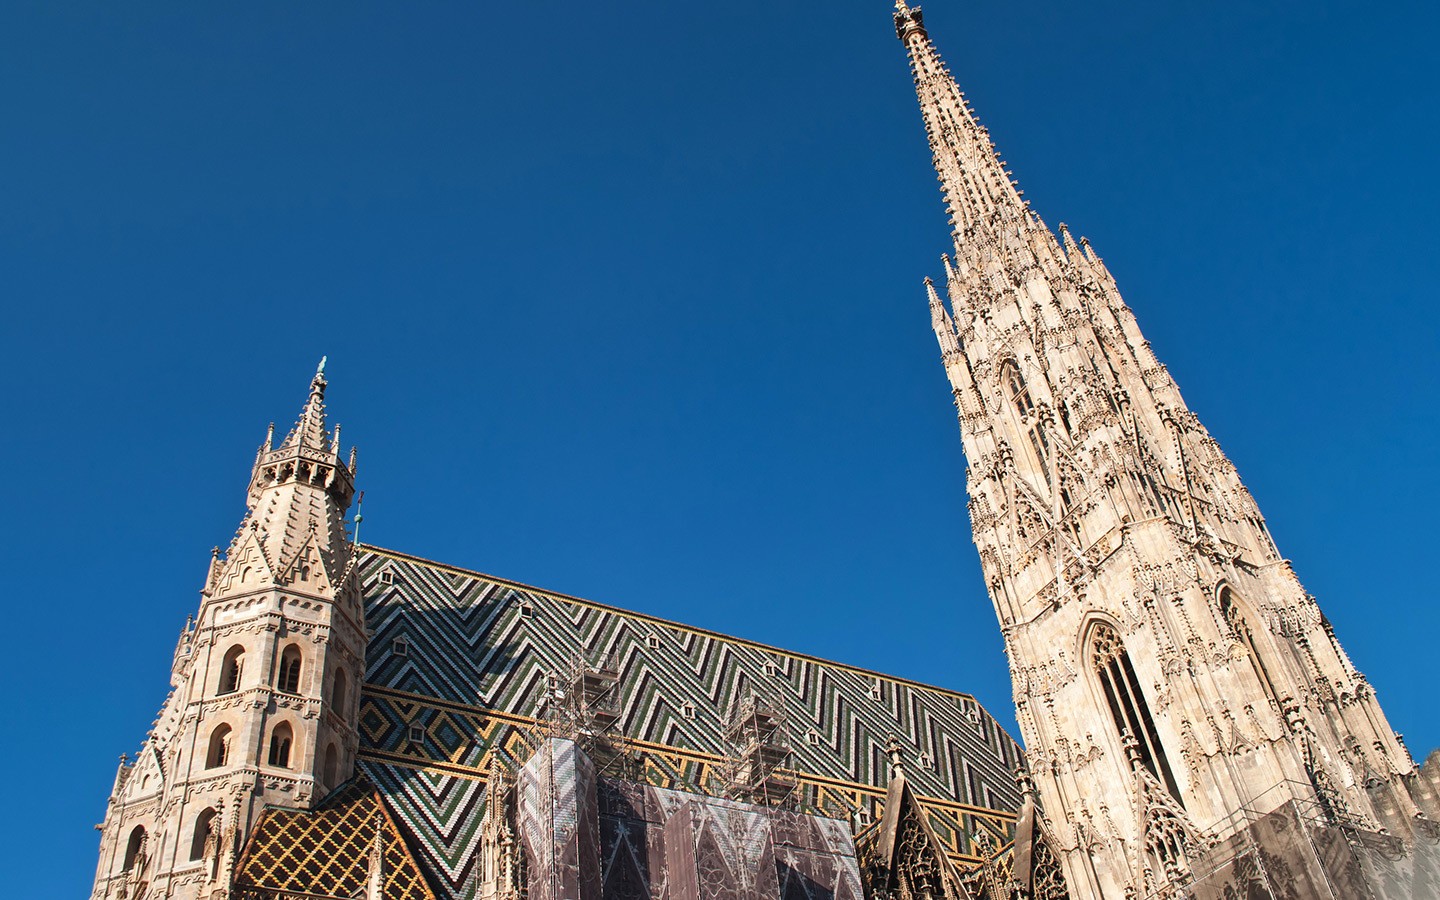 St Stephen’s Cathedral in Vienna